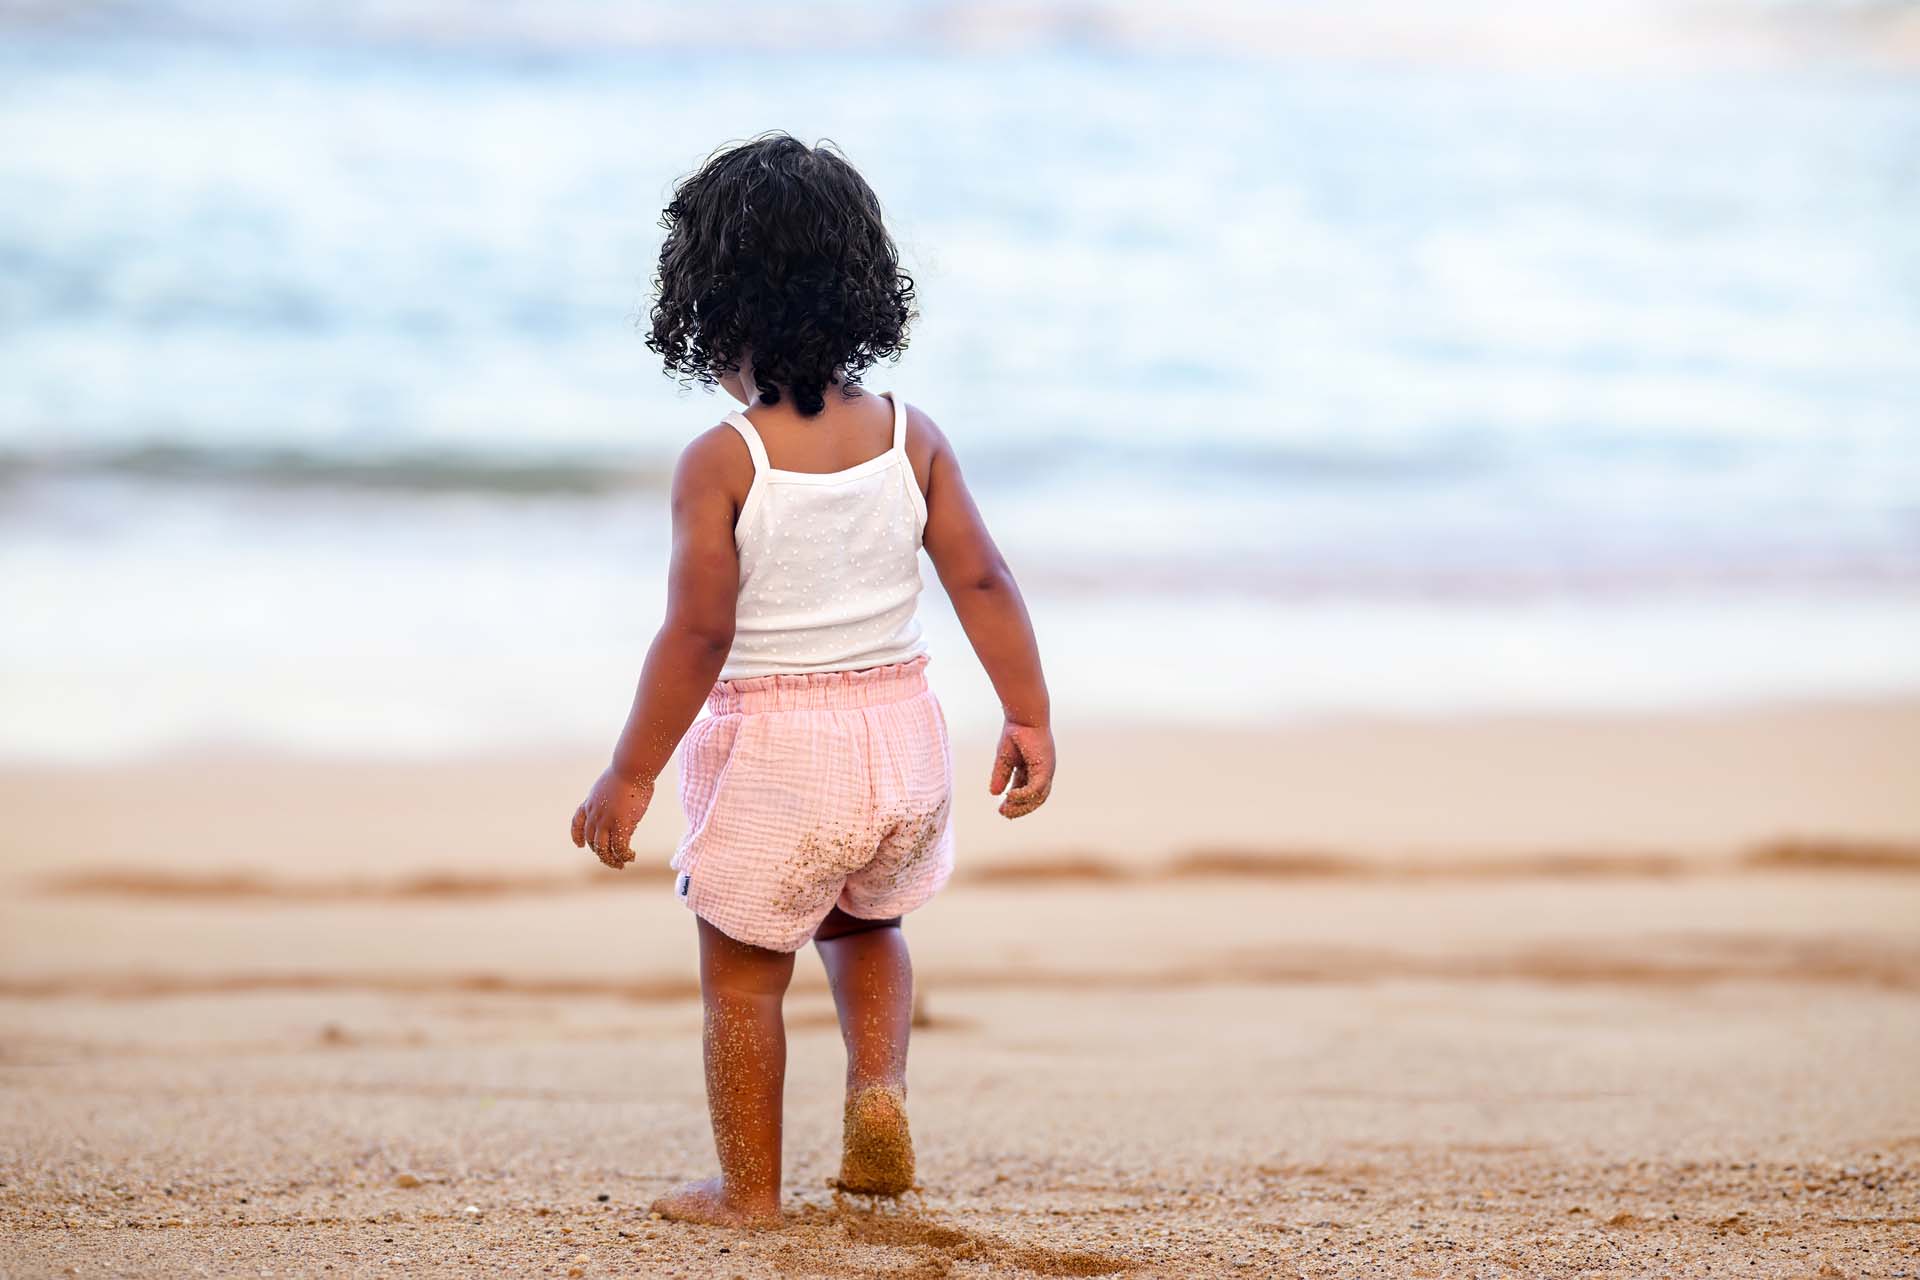 A young girl in a white tank top and pink shorts standing on a sandy beach, looking out at the ocean.